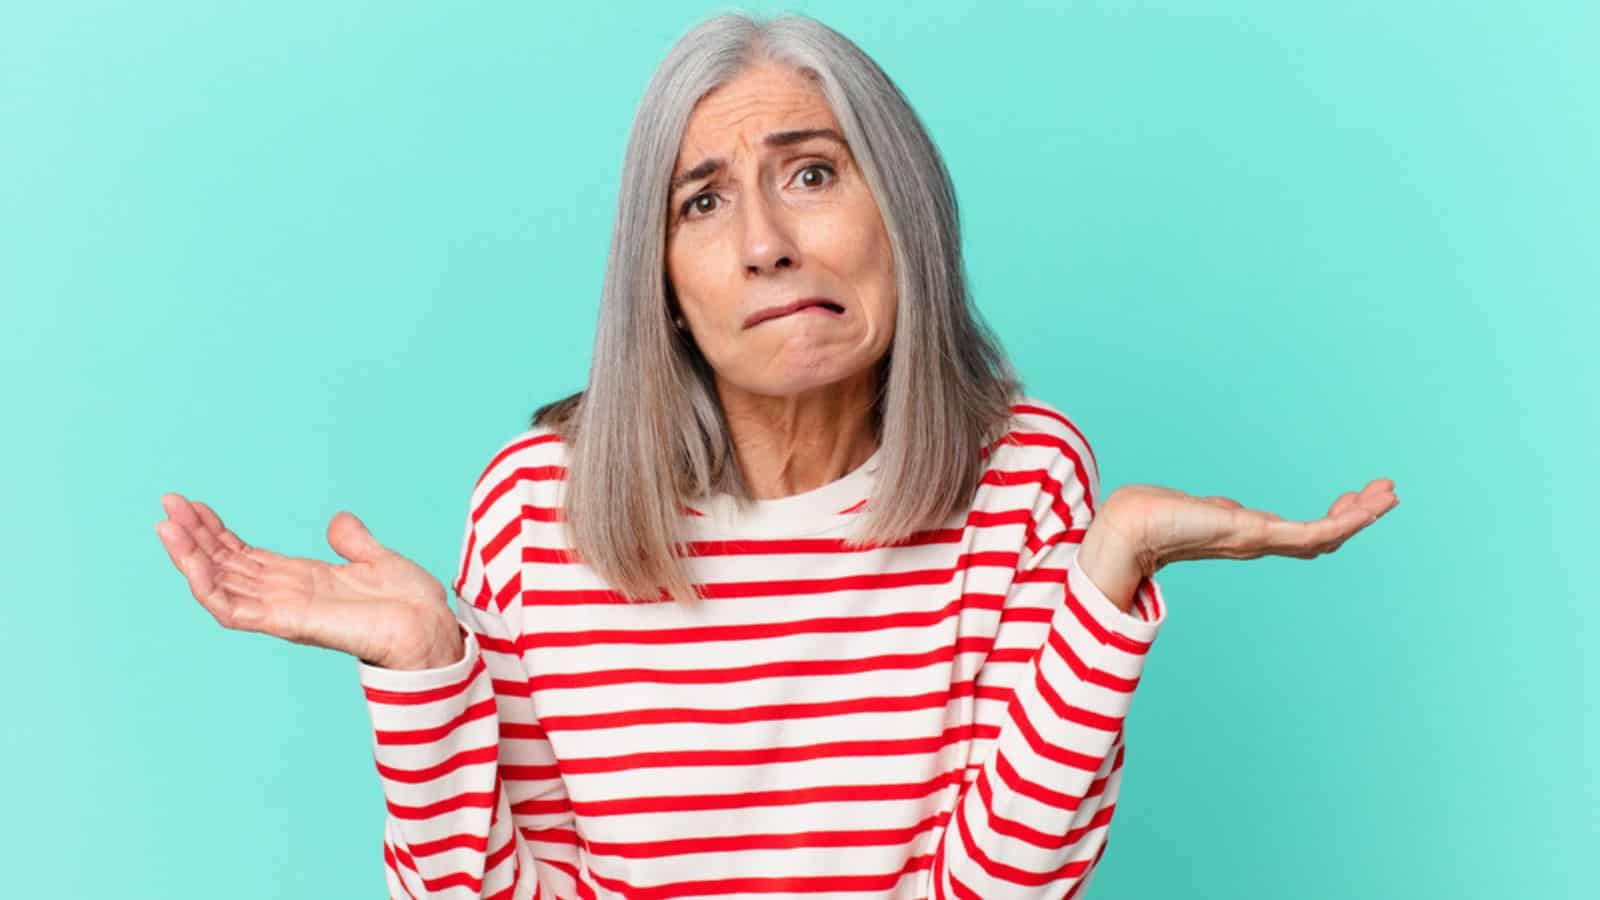 Middle age white hair woman feeling puzzled and confused